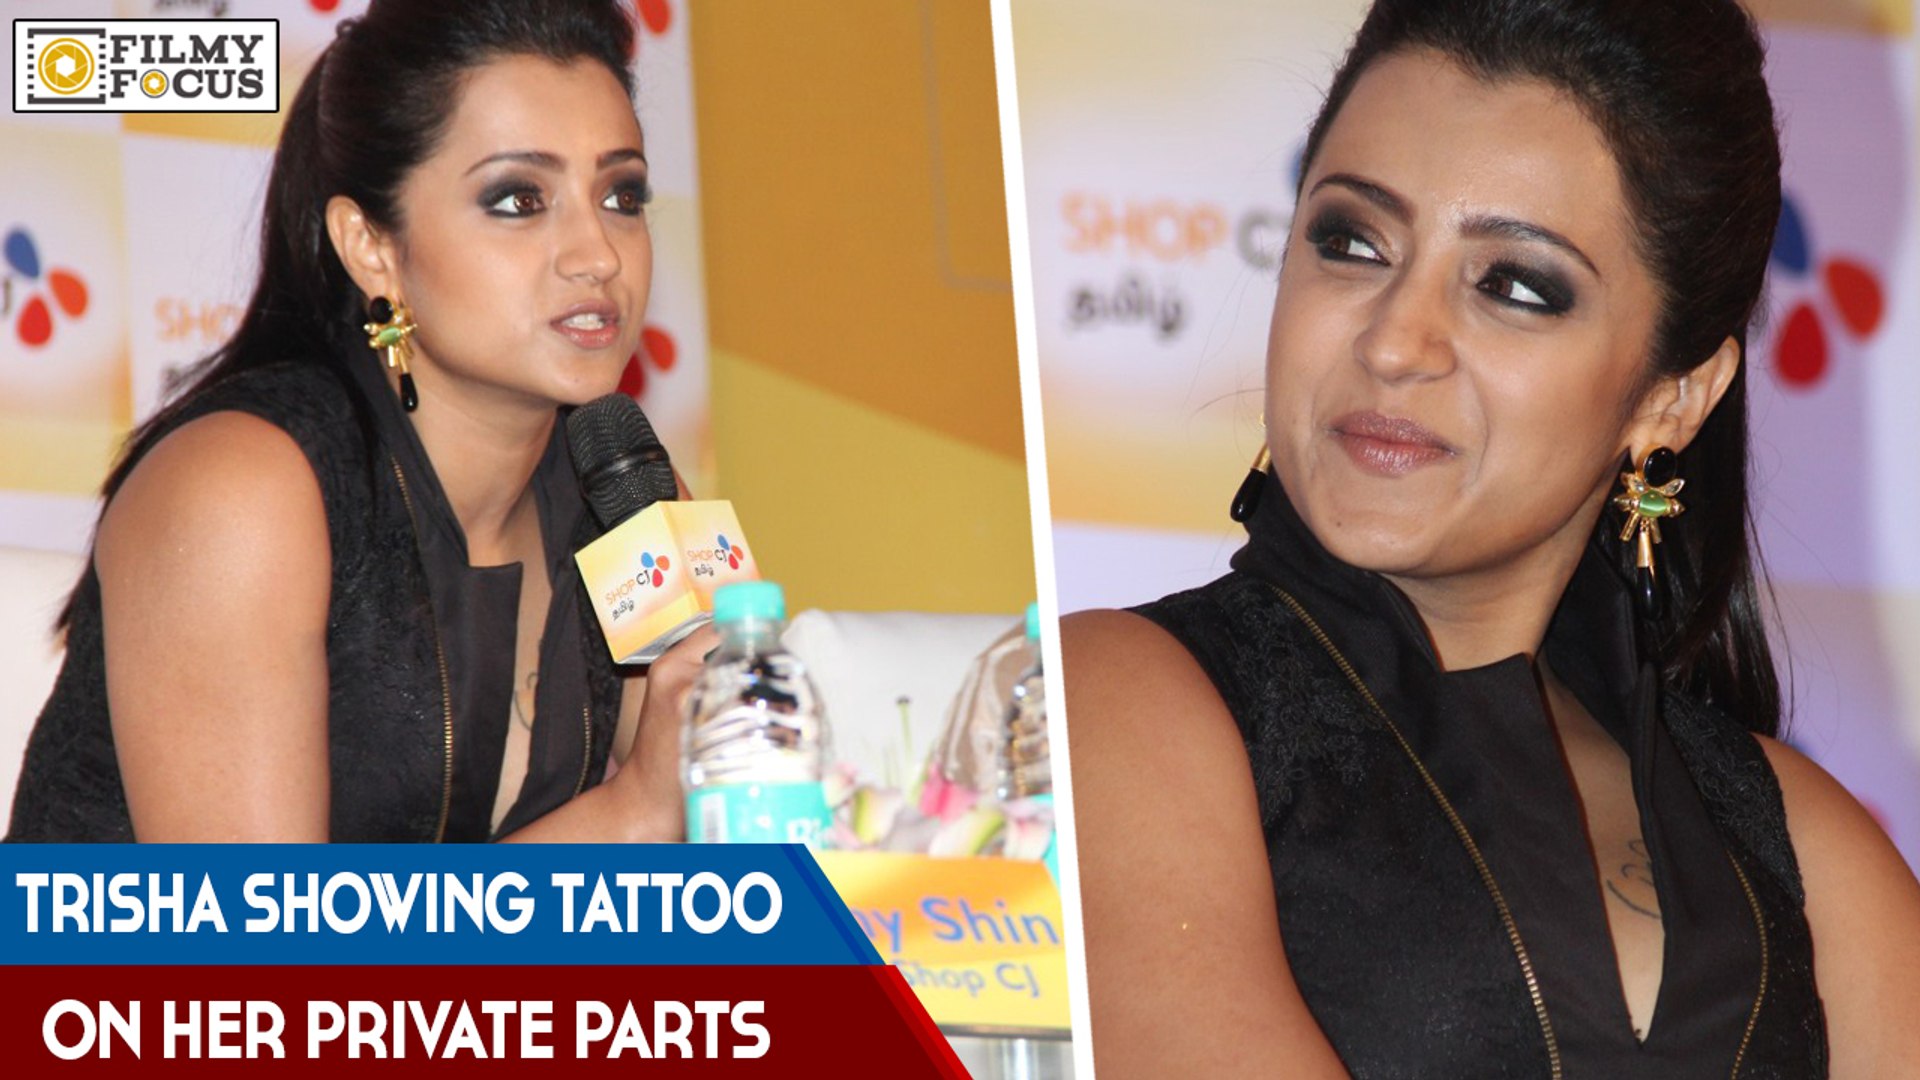 Trisha Showing Tattoo on her Private Parts - Filmy Focus - video Dailymotion